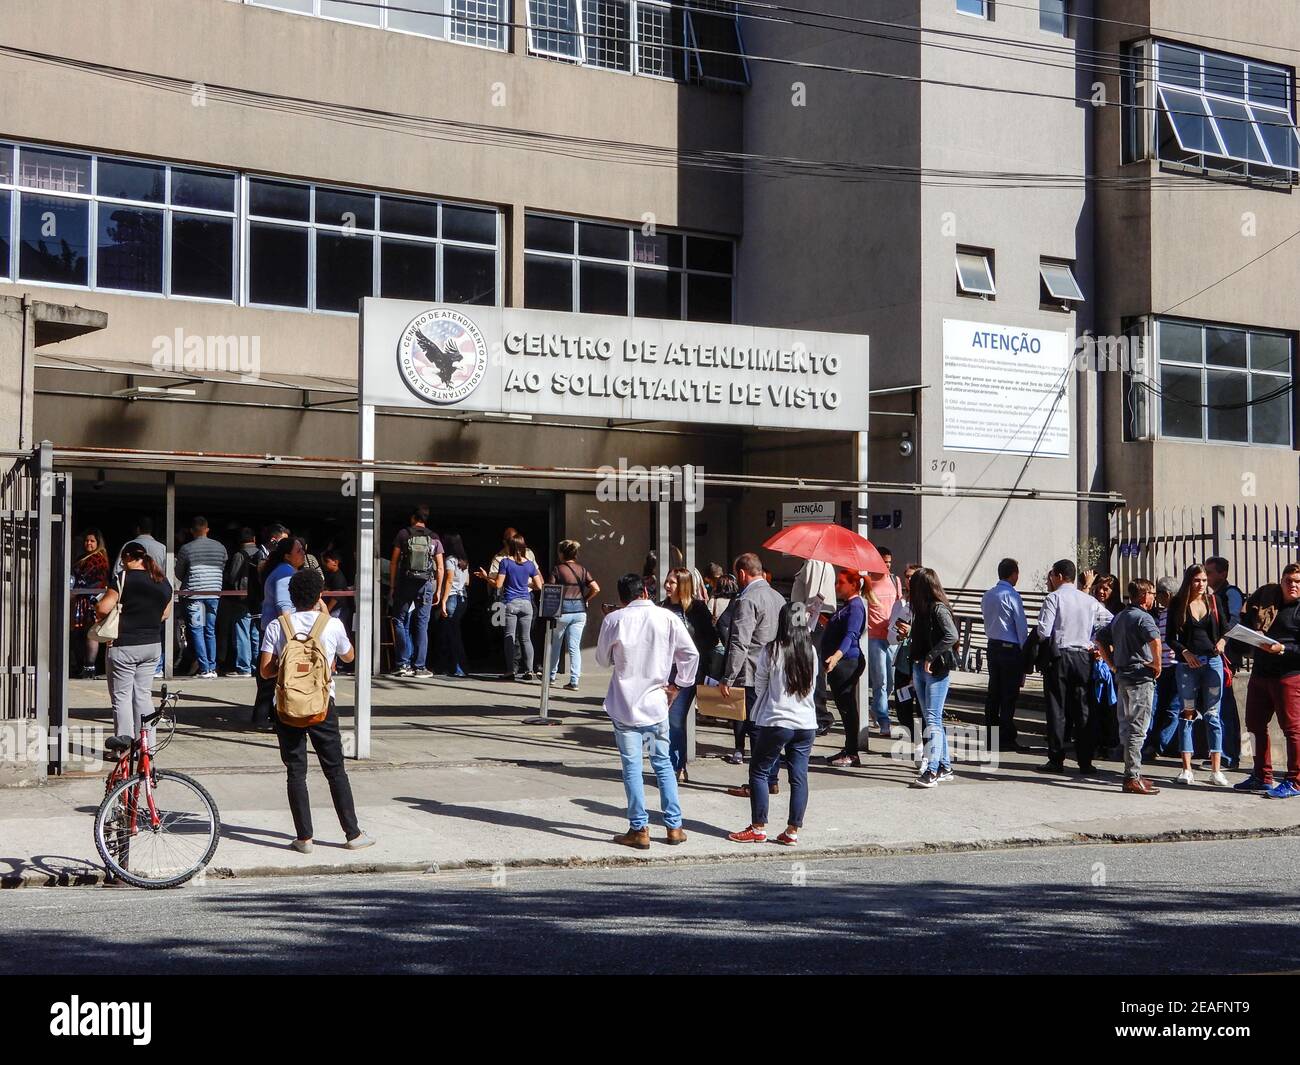 SÃO PAULO, BRAZIL, May 2019: Assistance center for the American visa applicant in São Paulo. Stock Photo